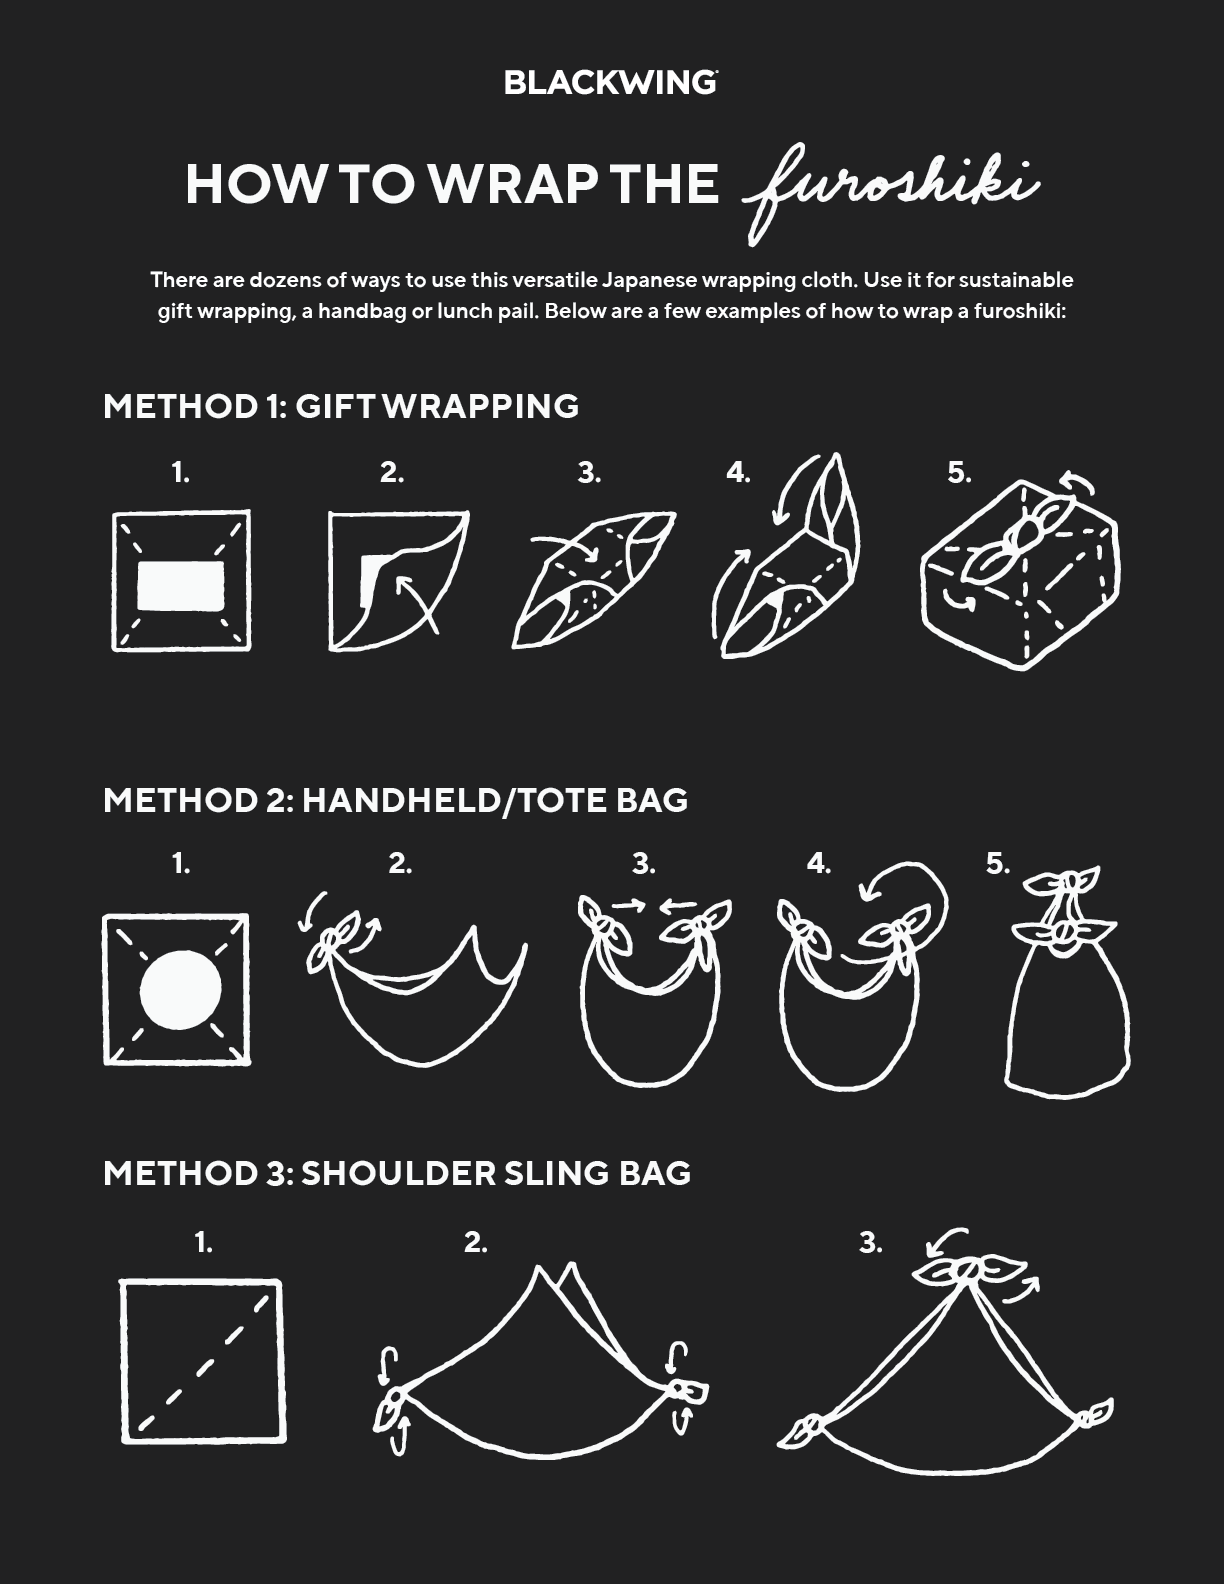 Learn the traditional Blackwing Furoshiki method for wrapping your fanny pack in an eco-friendly way.